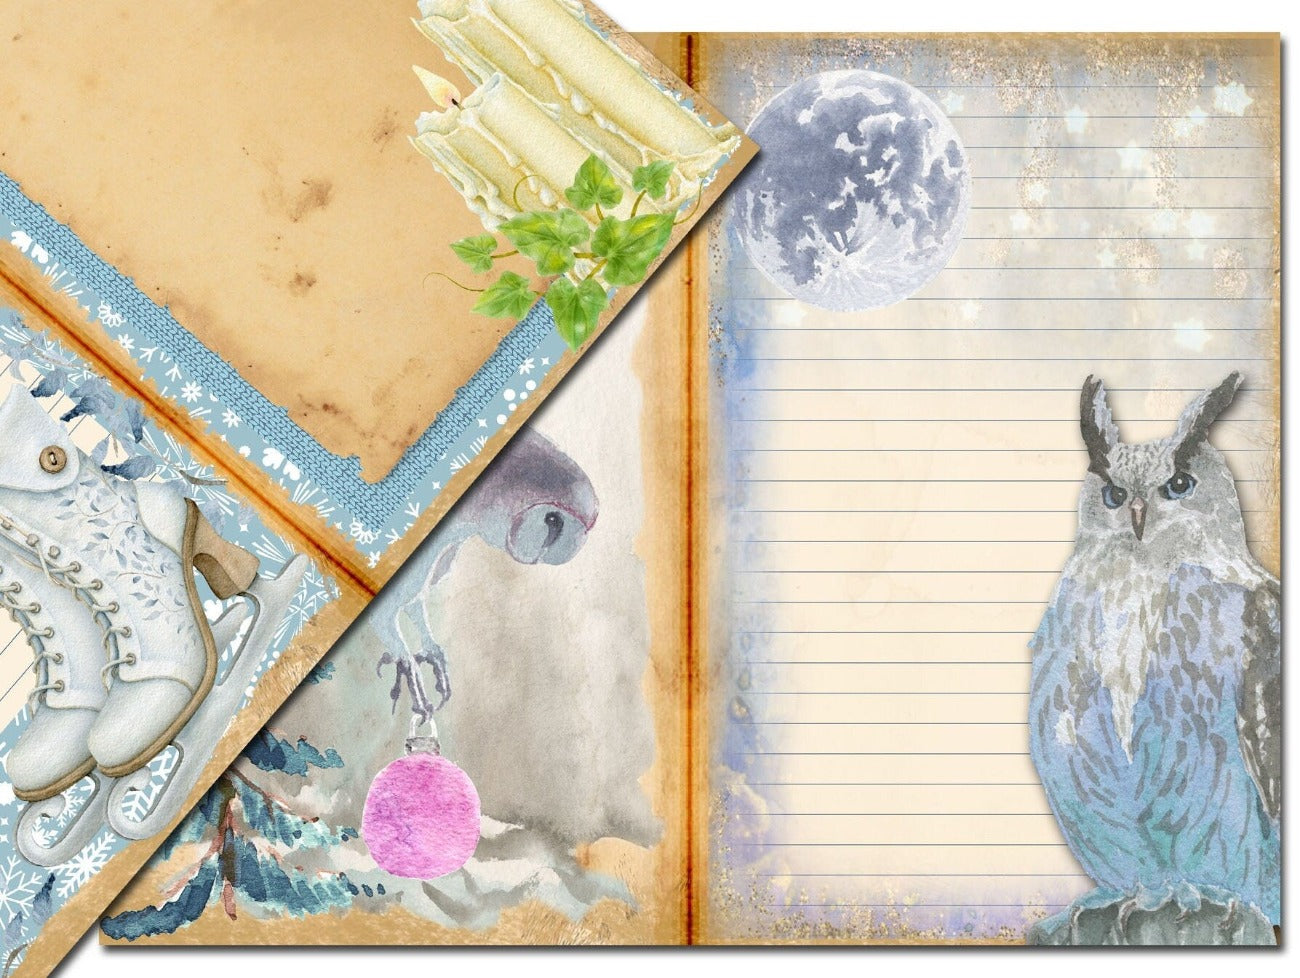 YULE JUNK JOURNAL Printable close-up of Wicca Inspired pages with owls, ice skates and inspirational quotes and images - Morgana Magick Spell